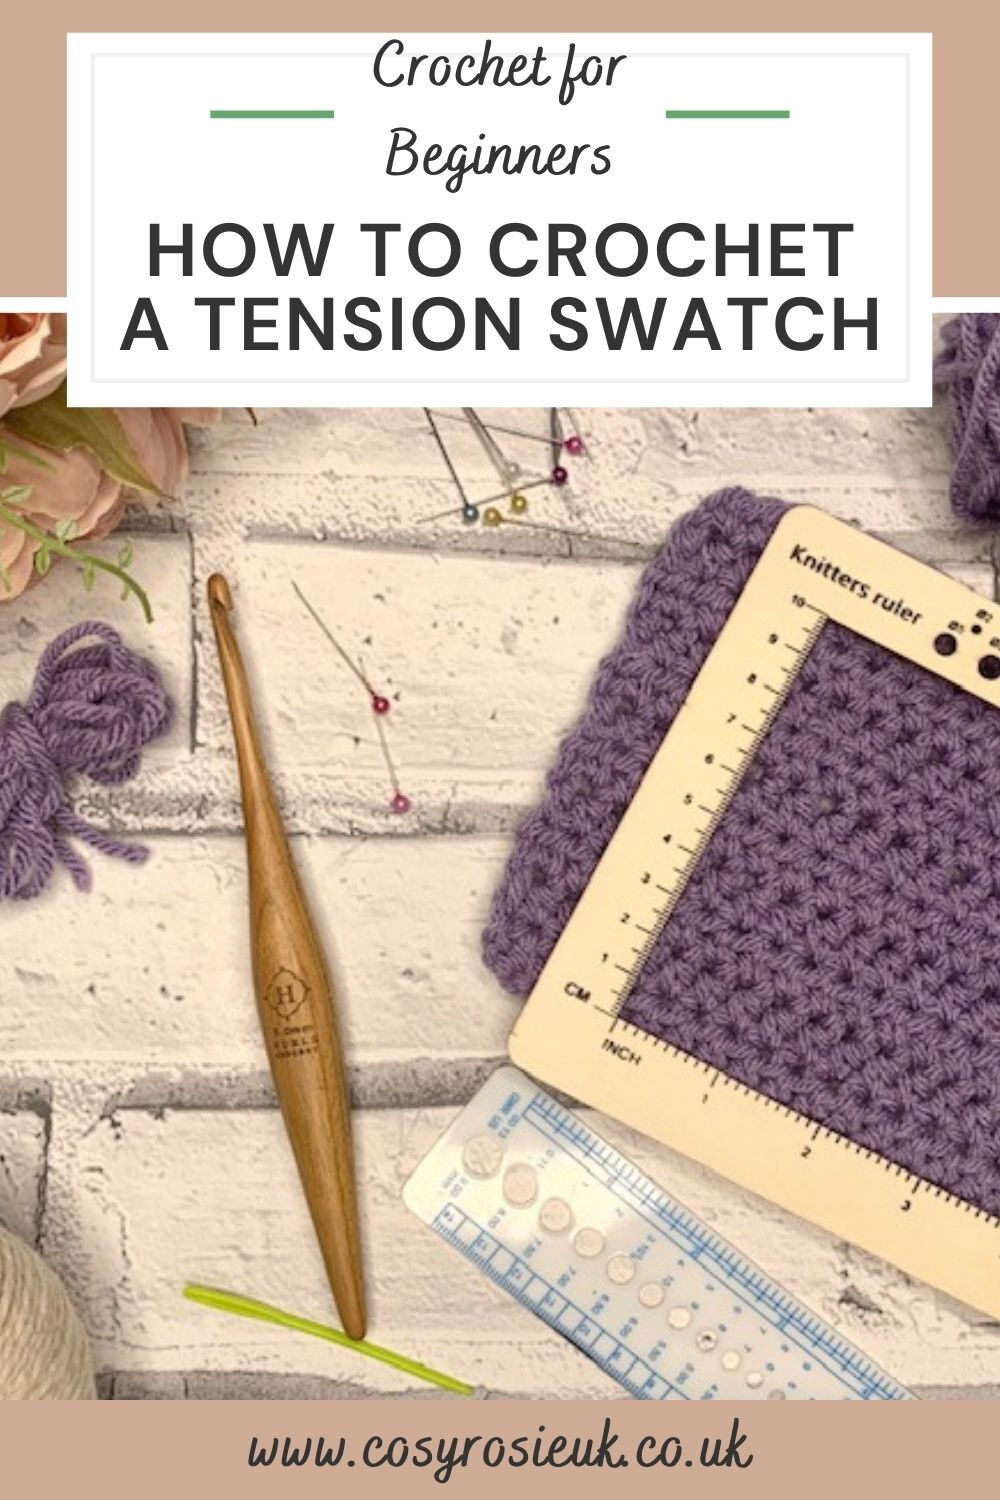 How to crochet a tension swatch